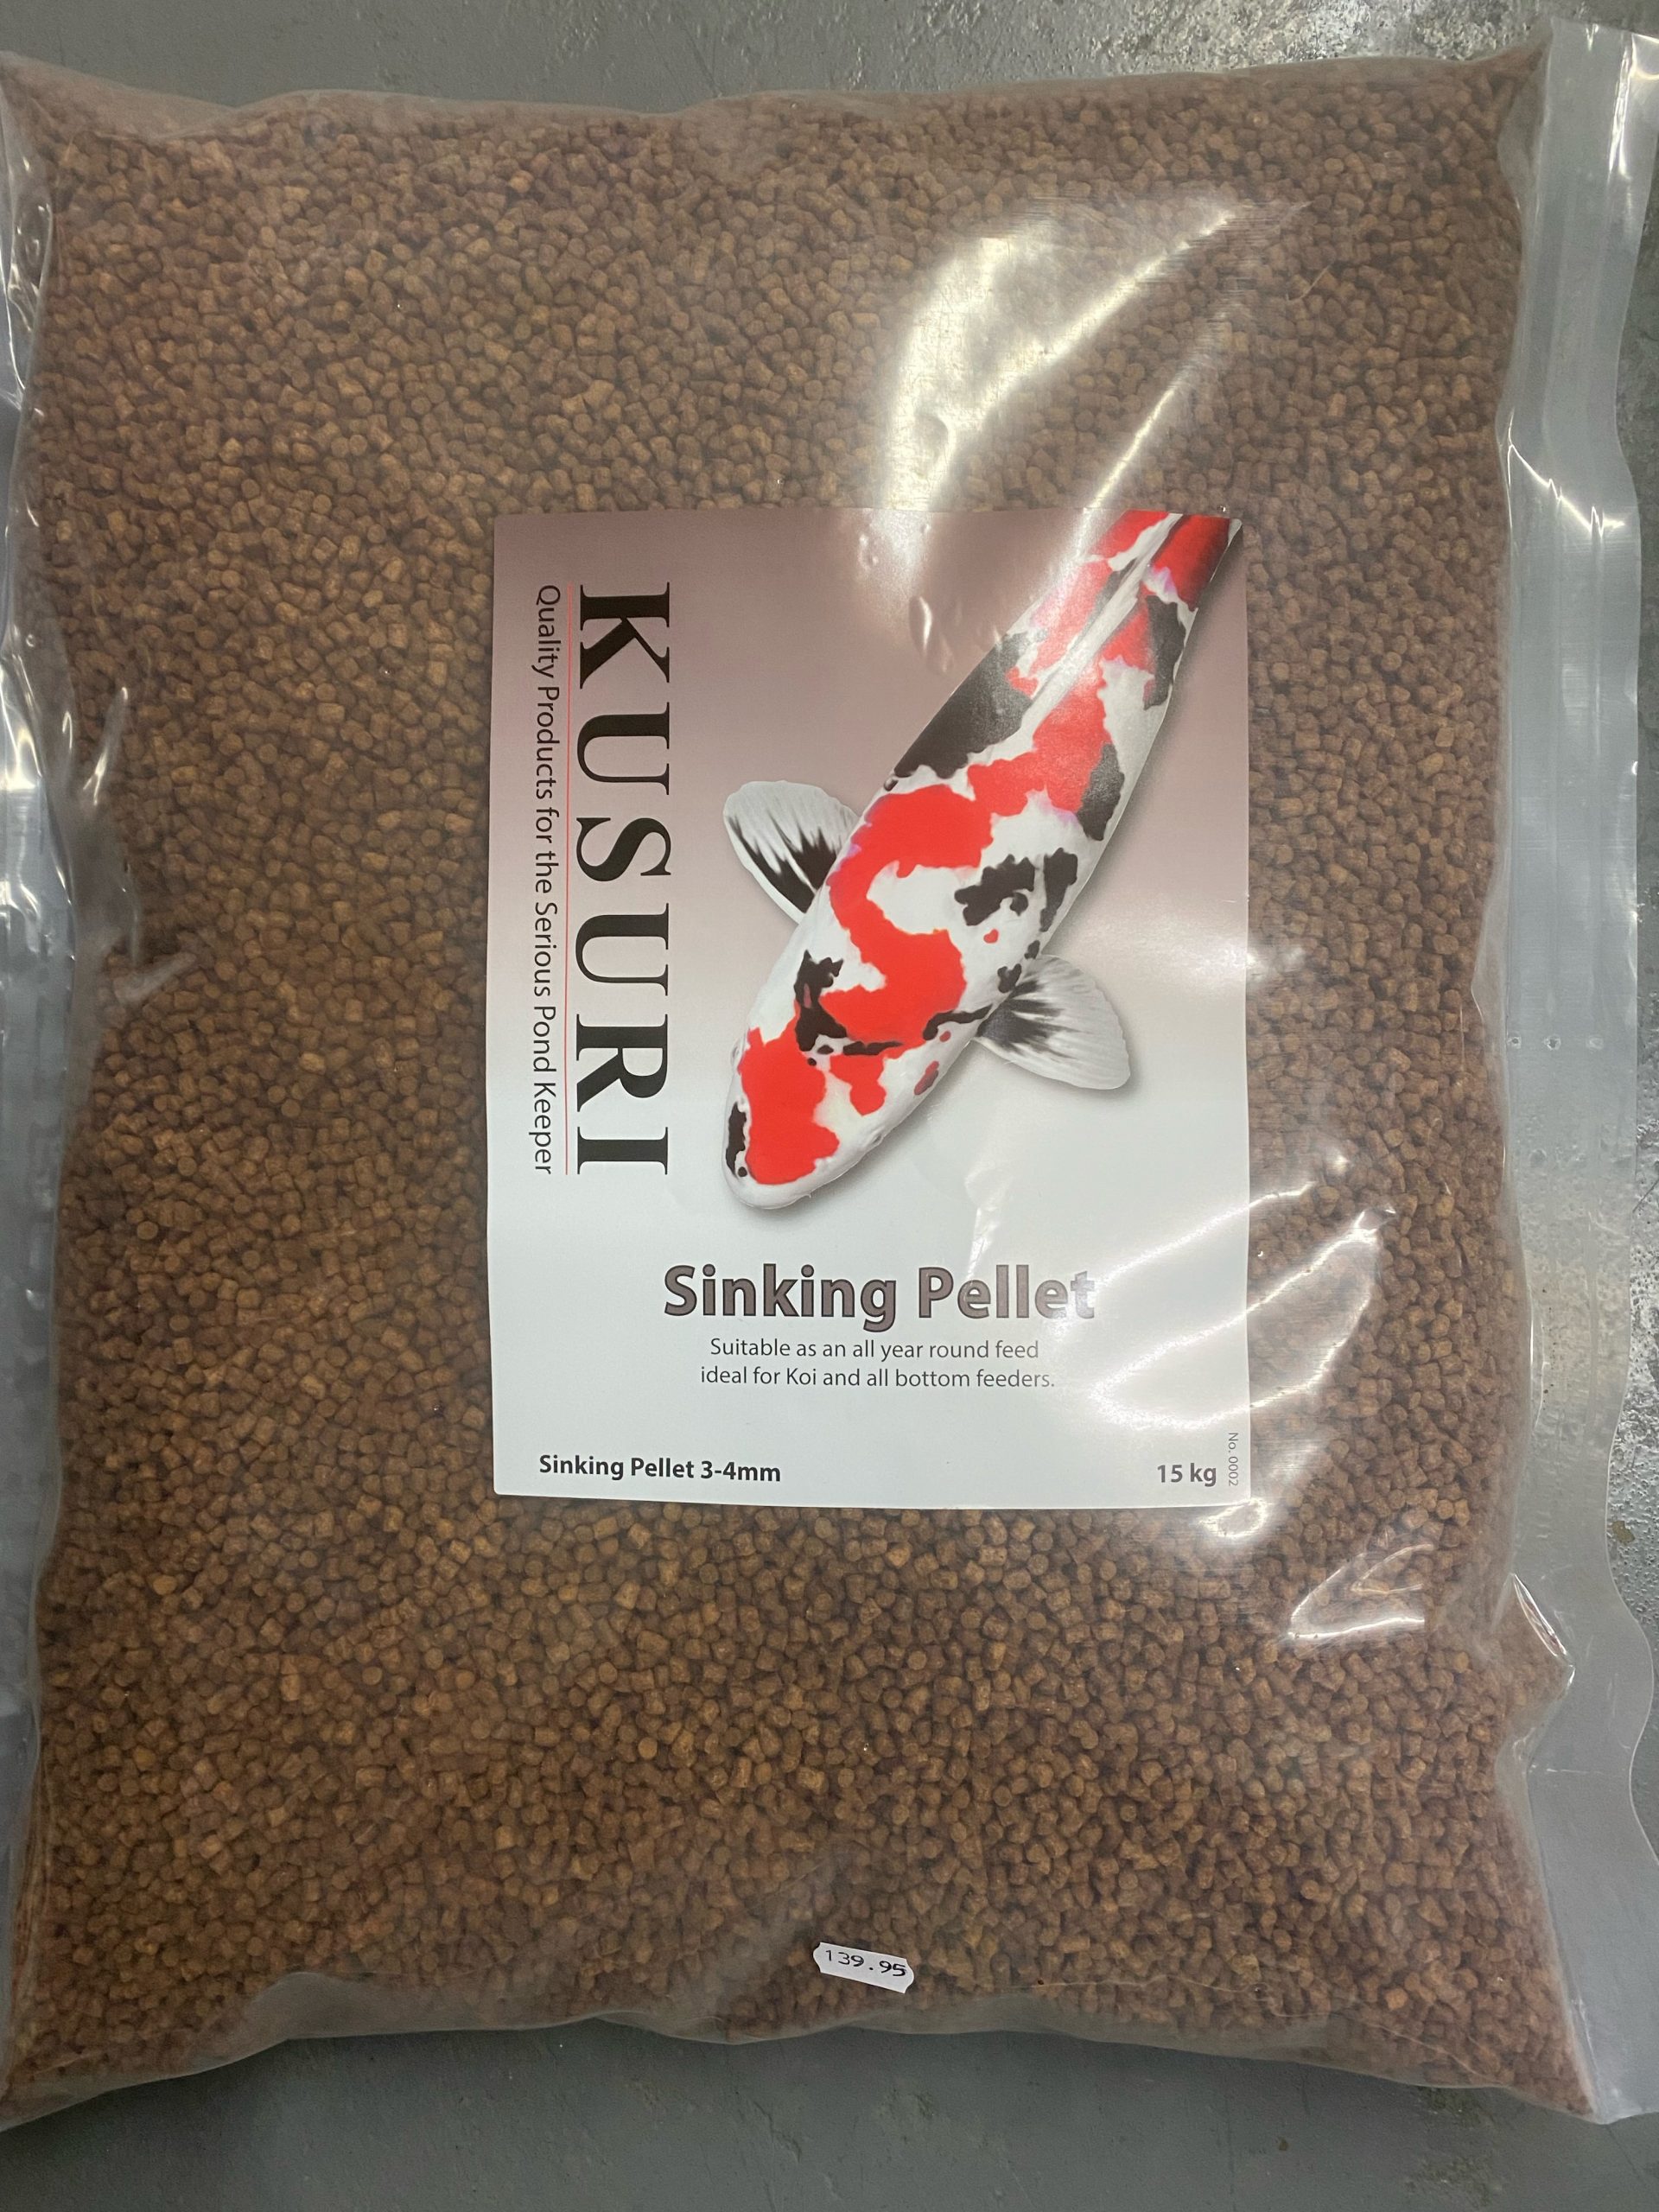 Elite Sinking Pellet For Koi Carp and all bottom feeders such as sturgeon and tench 15kg